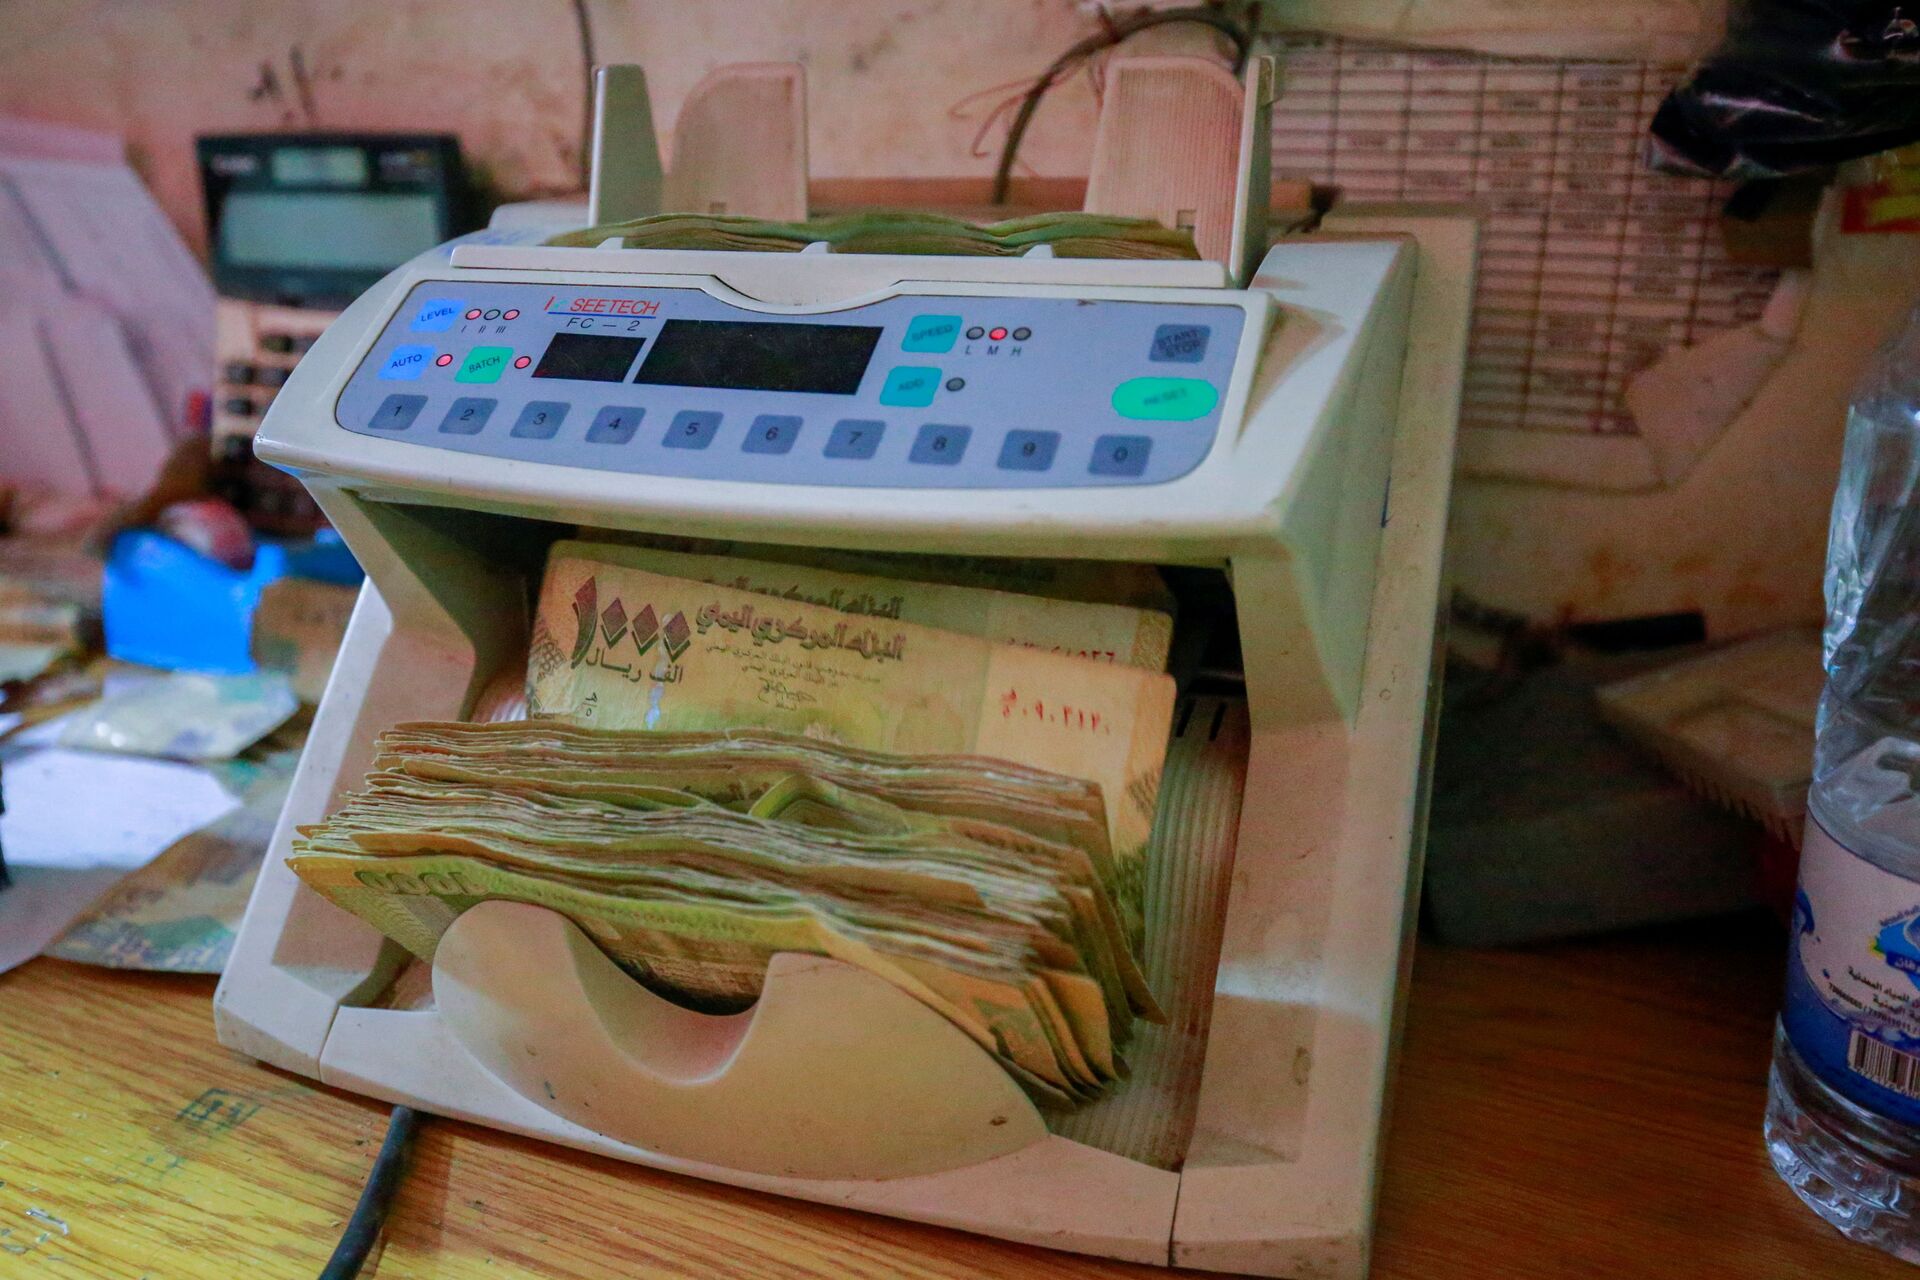 Yemeni currency banknotes are counted on a counting machine at an exchange company in Sanaa, Yemen June 28, 2021. Picture taken June 28, 2021. - Sputnik International, 1920, 07.09.2021